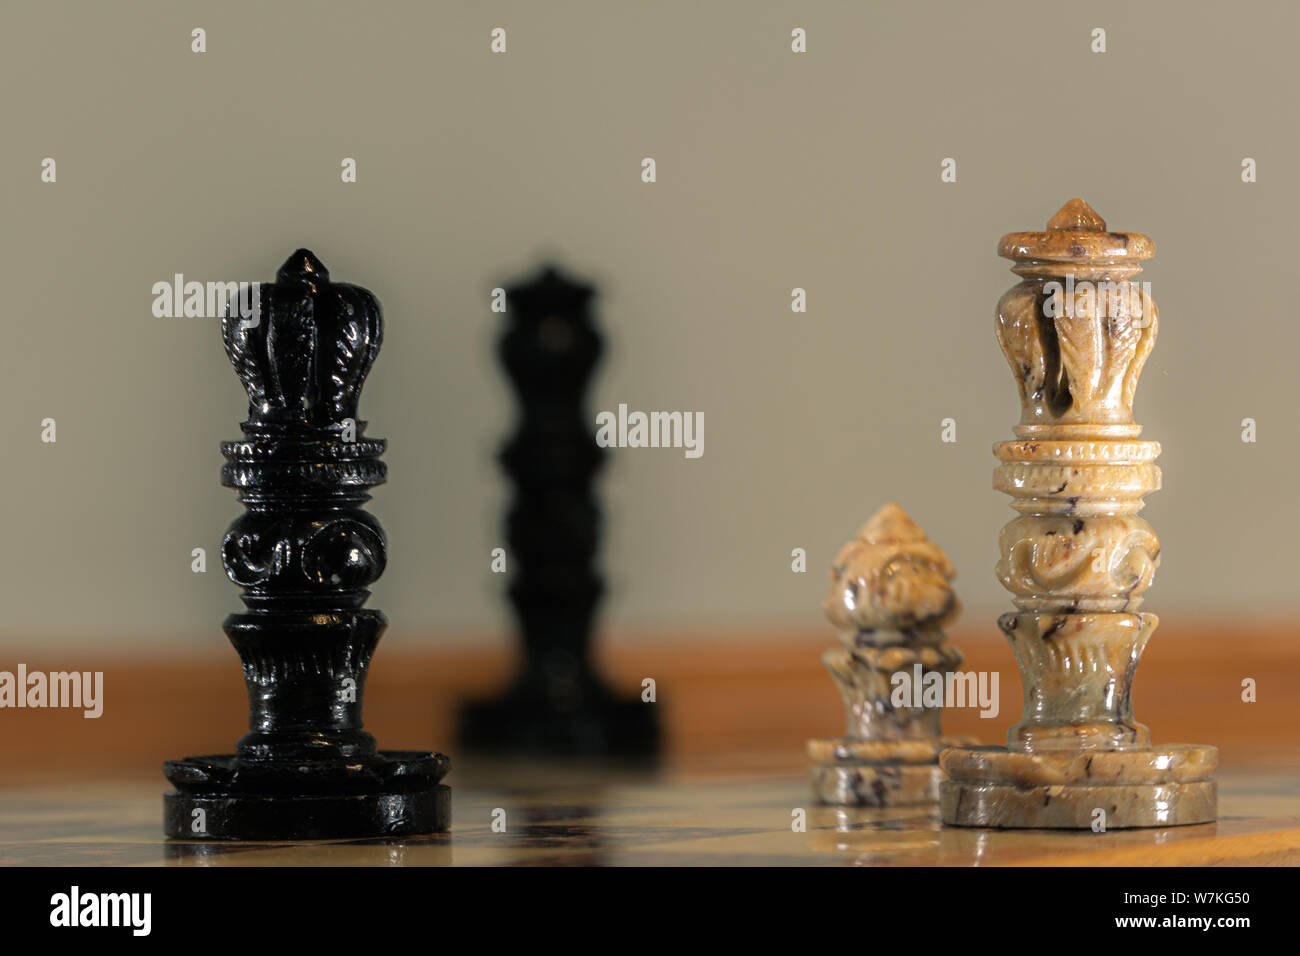 Chess board with handmade stone pieces. Queen, King, Pawn, and distant King. Stock Photo